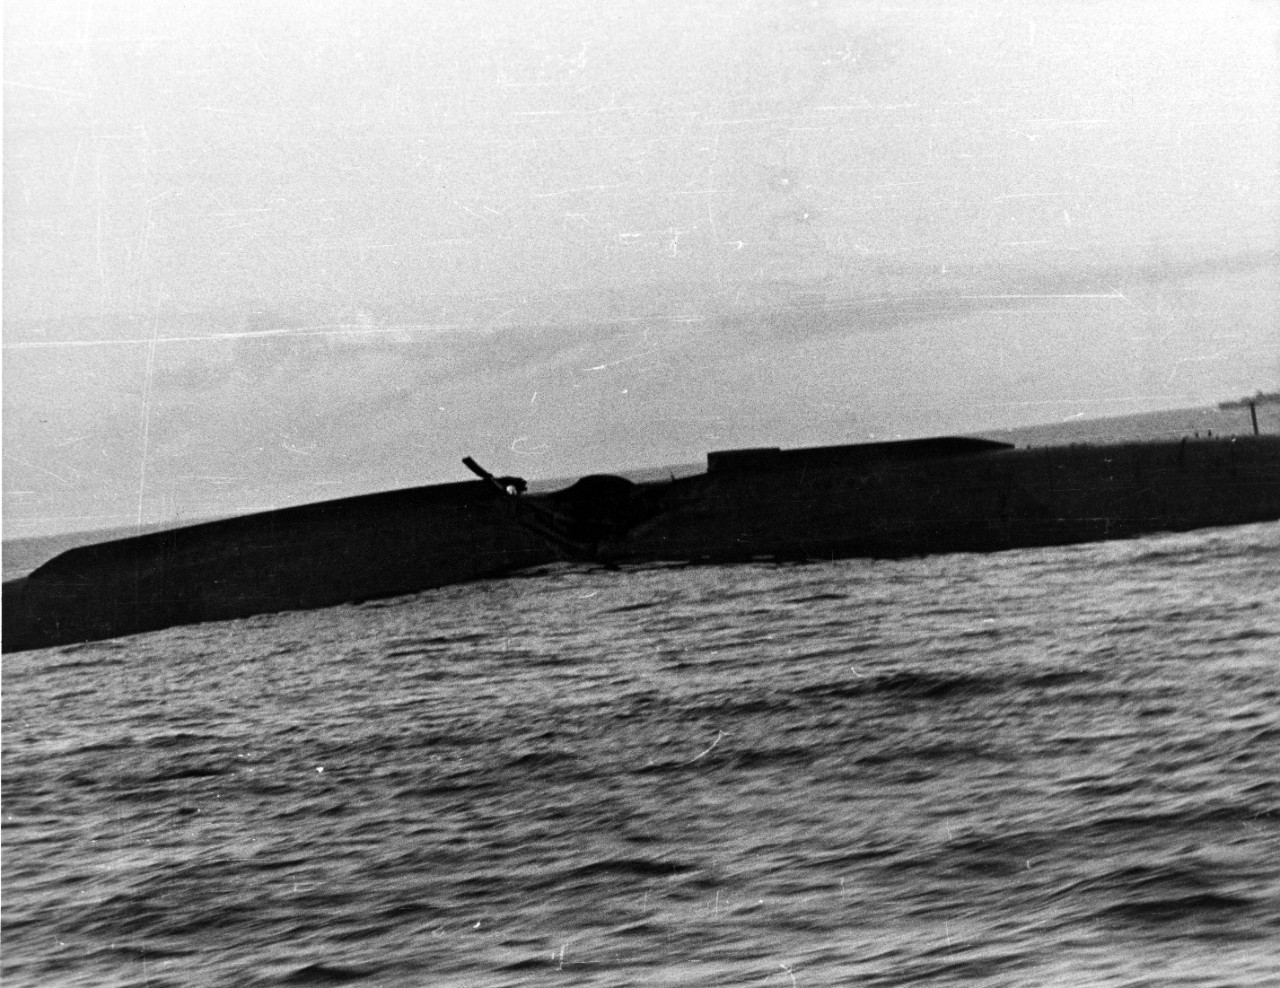 Photo #: NH 106001  Battle of Midway, June 1942